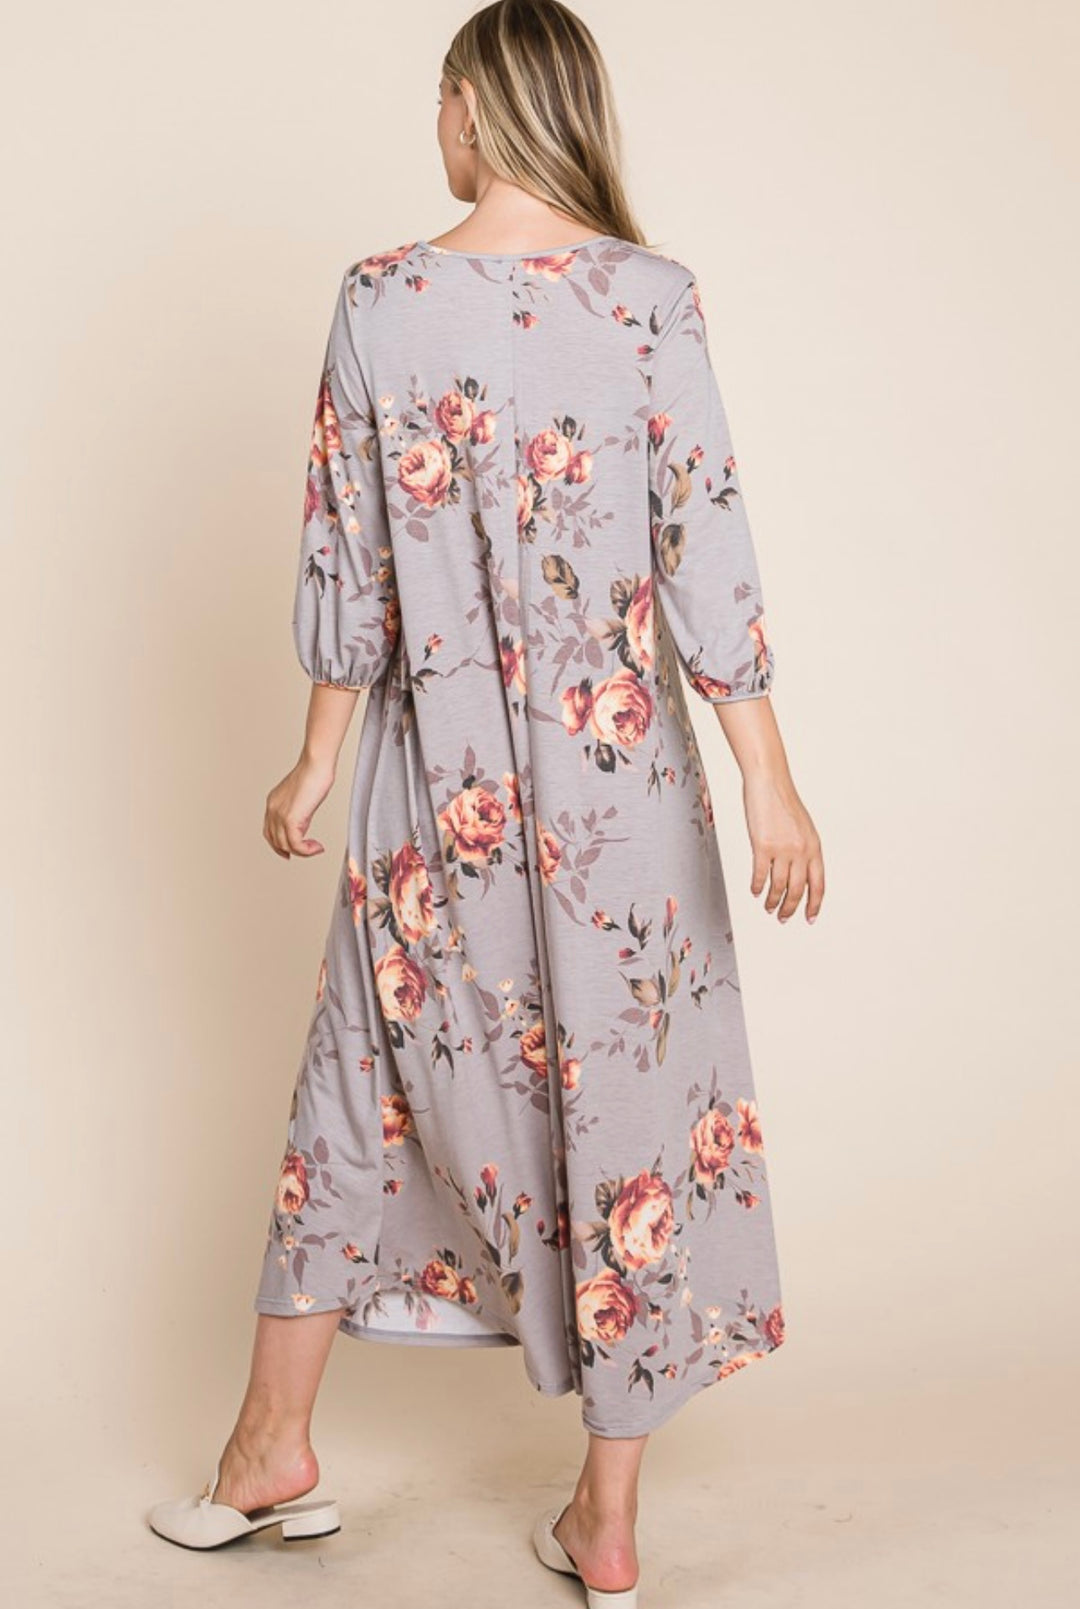 Liza Lou's BomBom Flowy Maxi Colorful Taupe/Gray Floral Dress